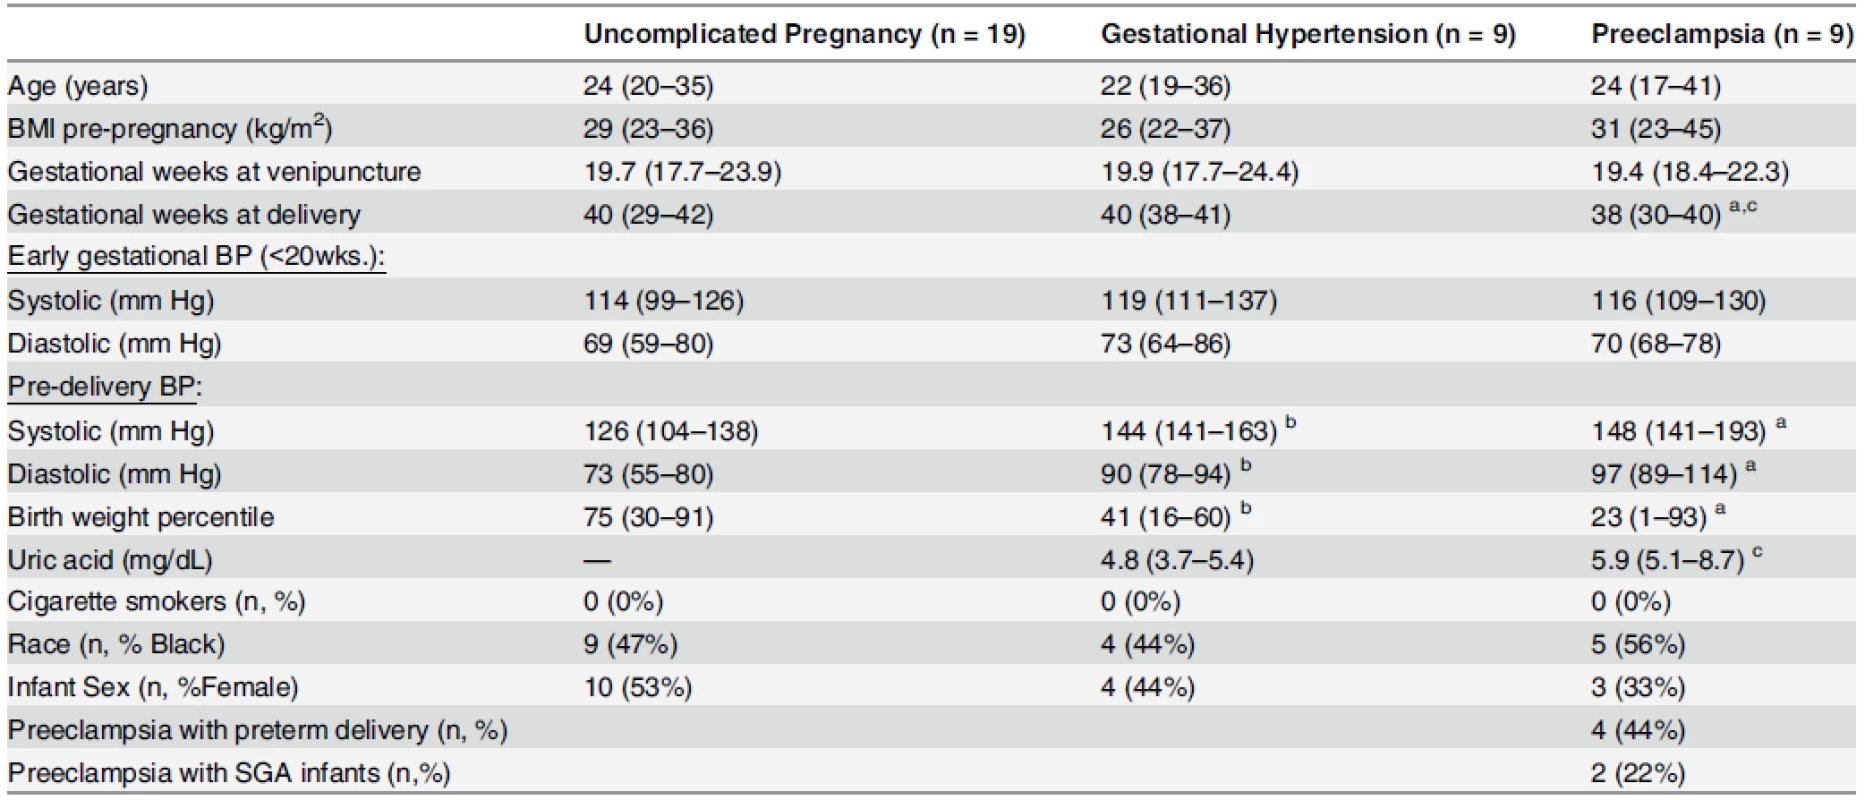 Clinical characteristics of uncomplicated pregnancy control (n = 19), gestational hypertensive (n = 9), and preeclampsia (n = 9) groups; for comparison of soluble Sdc1 in gestational age-matched, 2nd trimester maternal plasma.